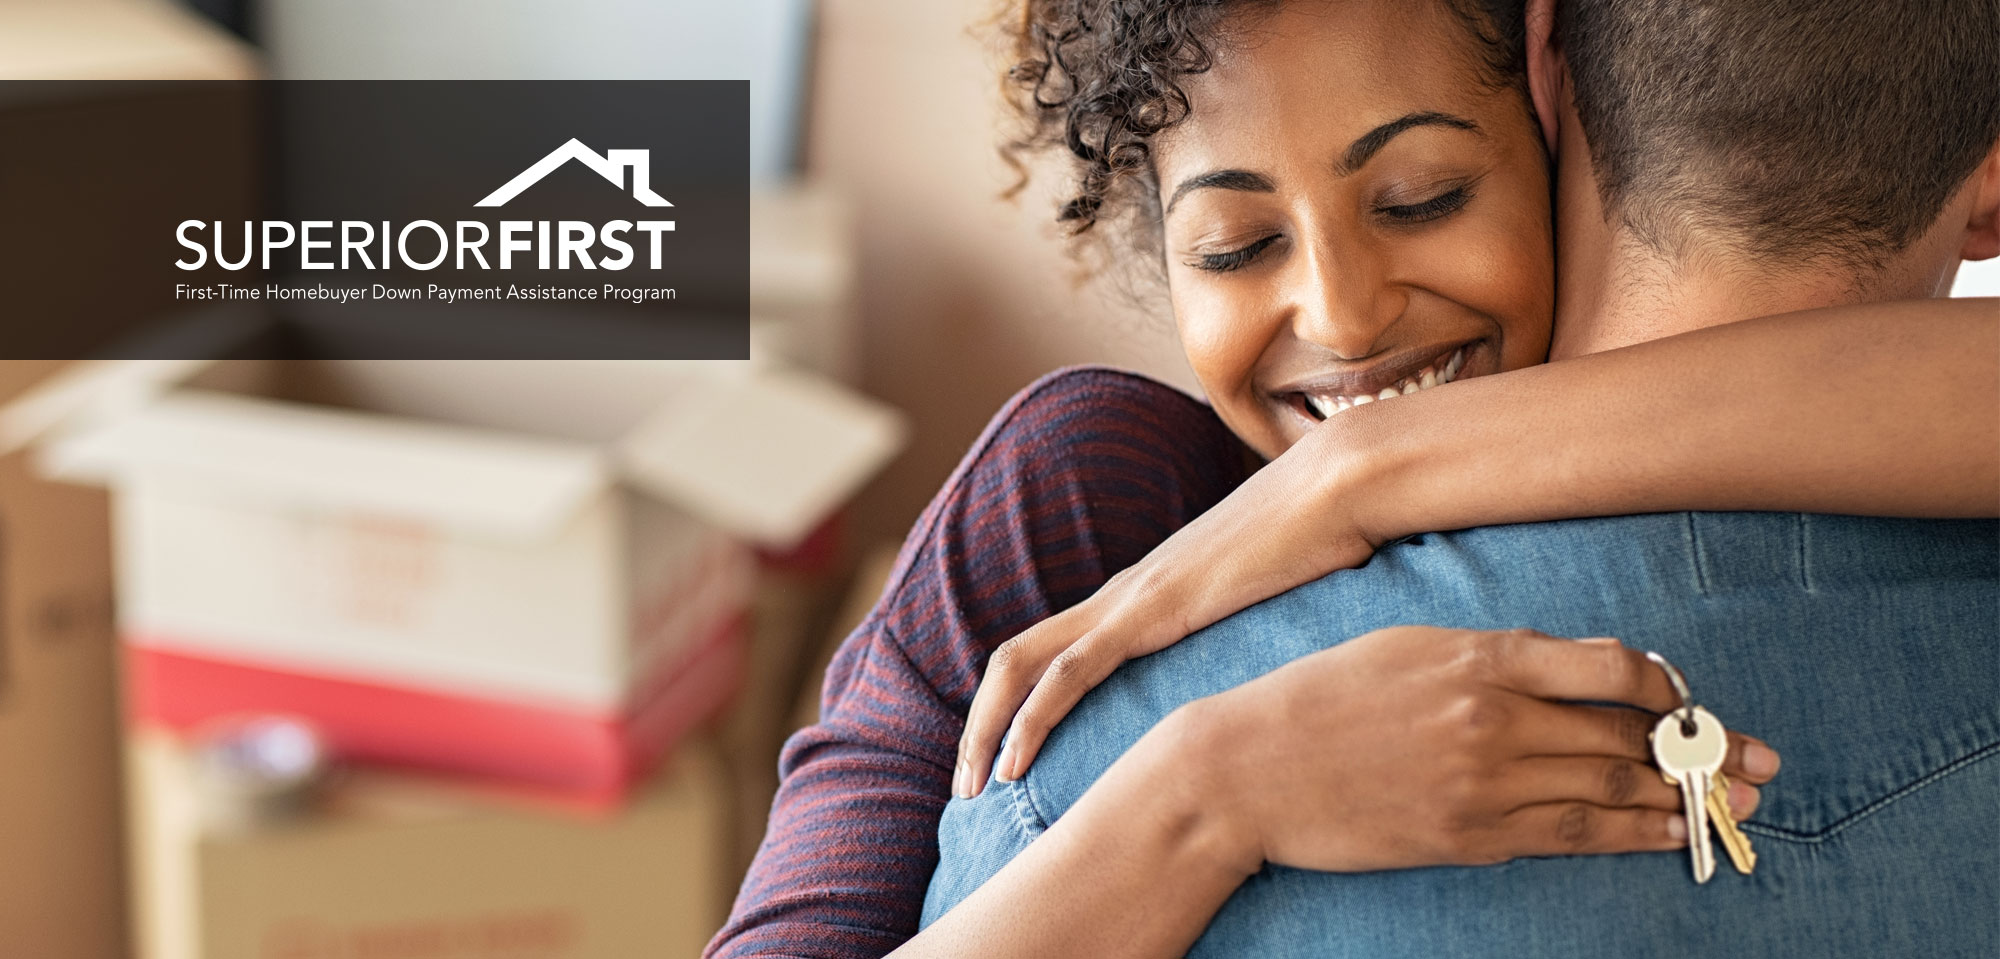 SuperiorFirst First-Time Homebuyer Down Payment Assistance Program